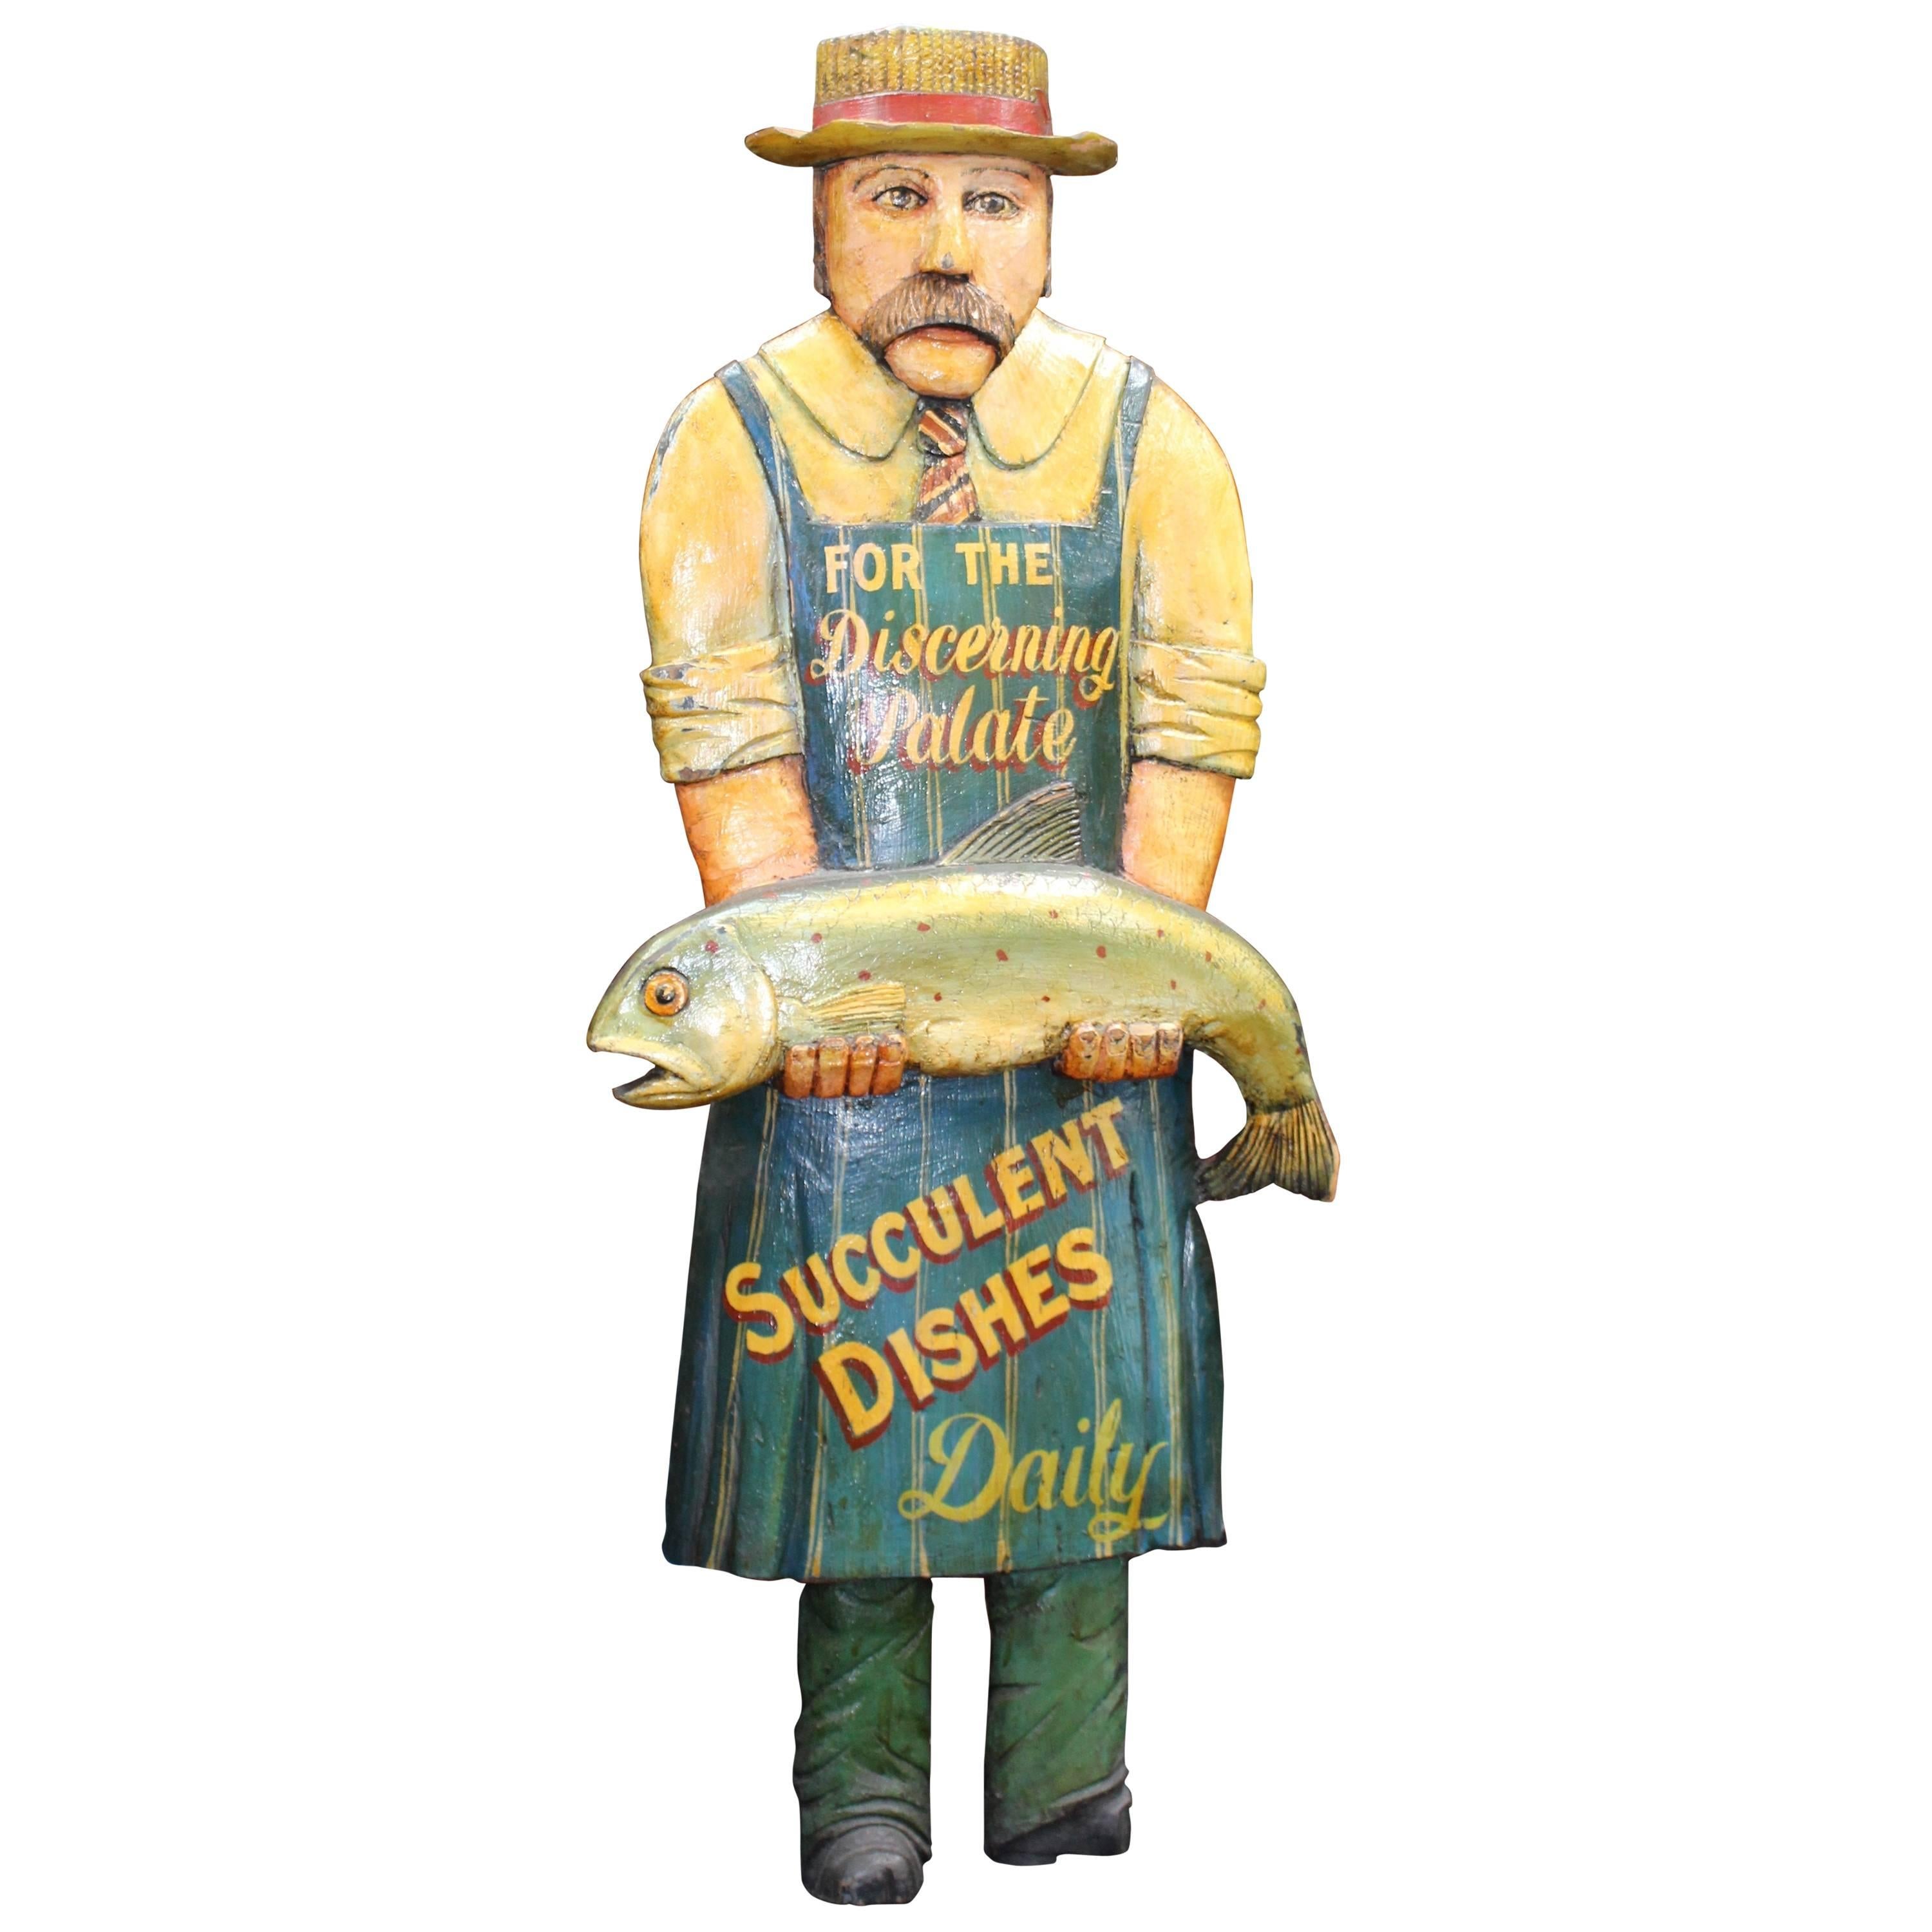 Hand-Carved Painted Fishmonger Sign Display